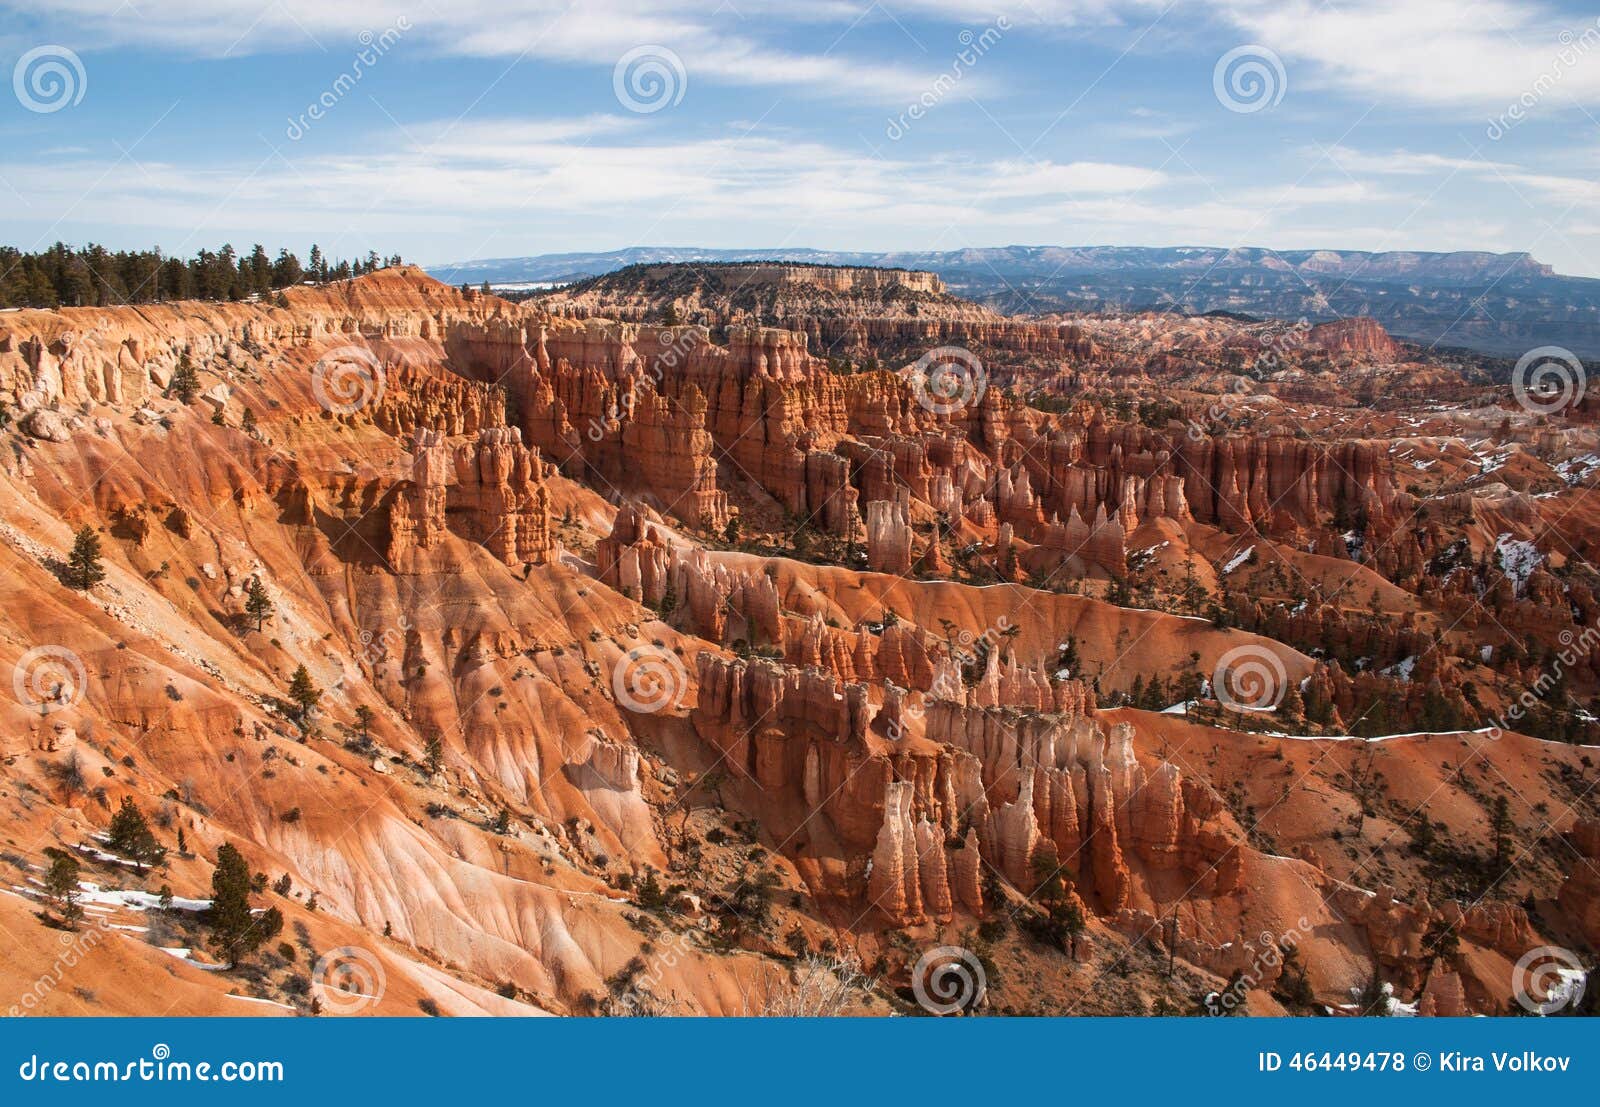 sunrise point overlook, bryce canyon national park